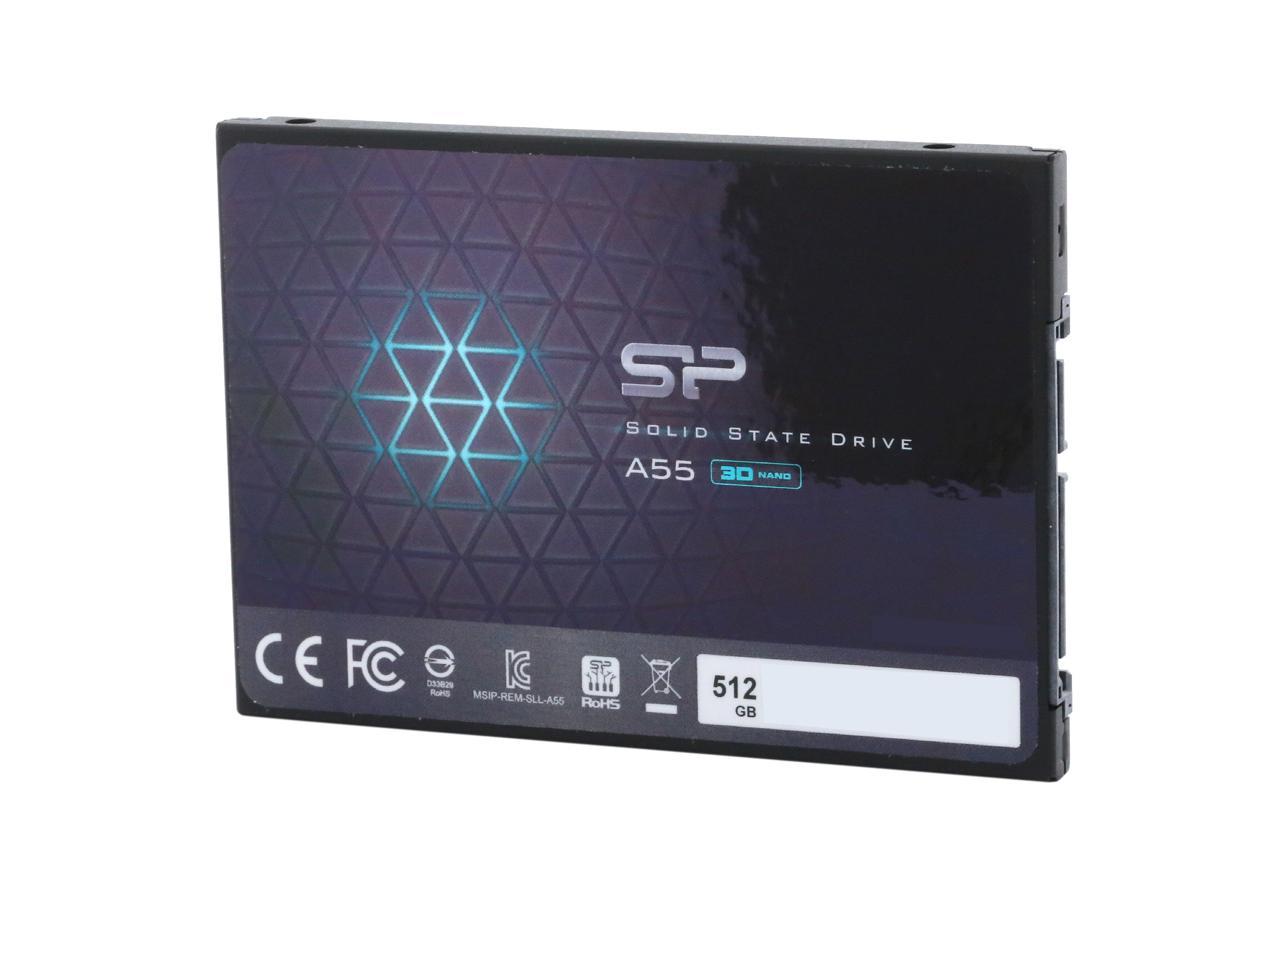 SP 512 SSD. (SSD) Silicon Power Ace a55. Silicon Power SSD Ace a55 2tb. Silicon Power 512gb a55. Silicon power a55